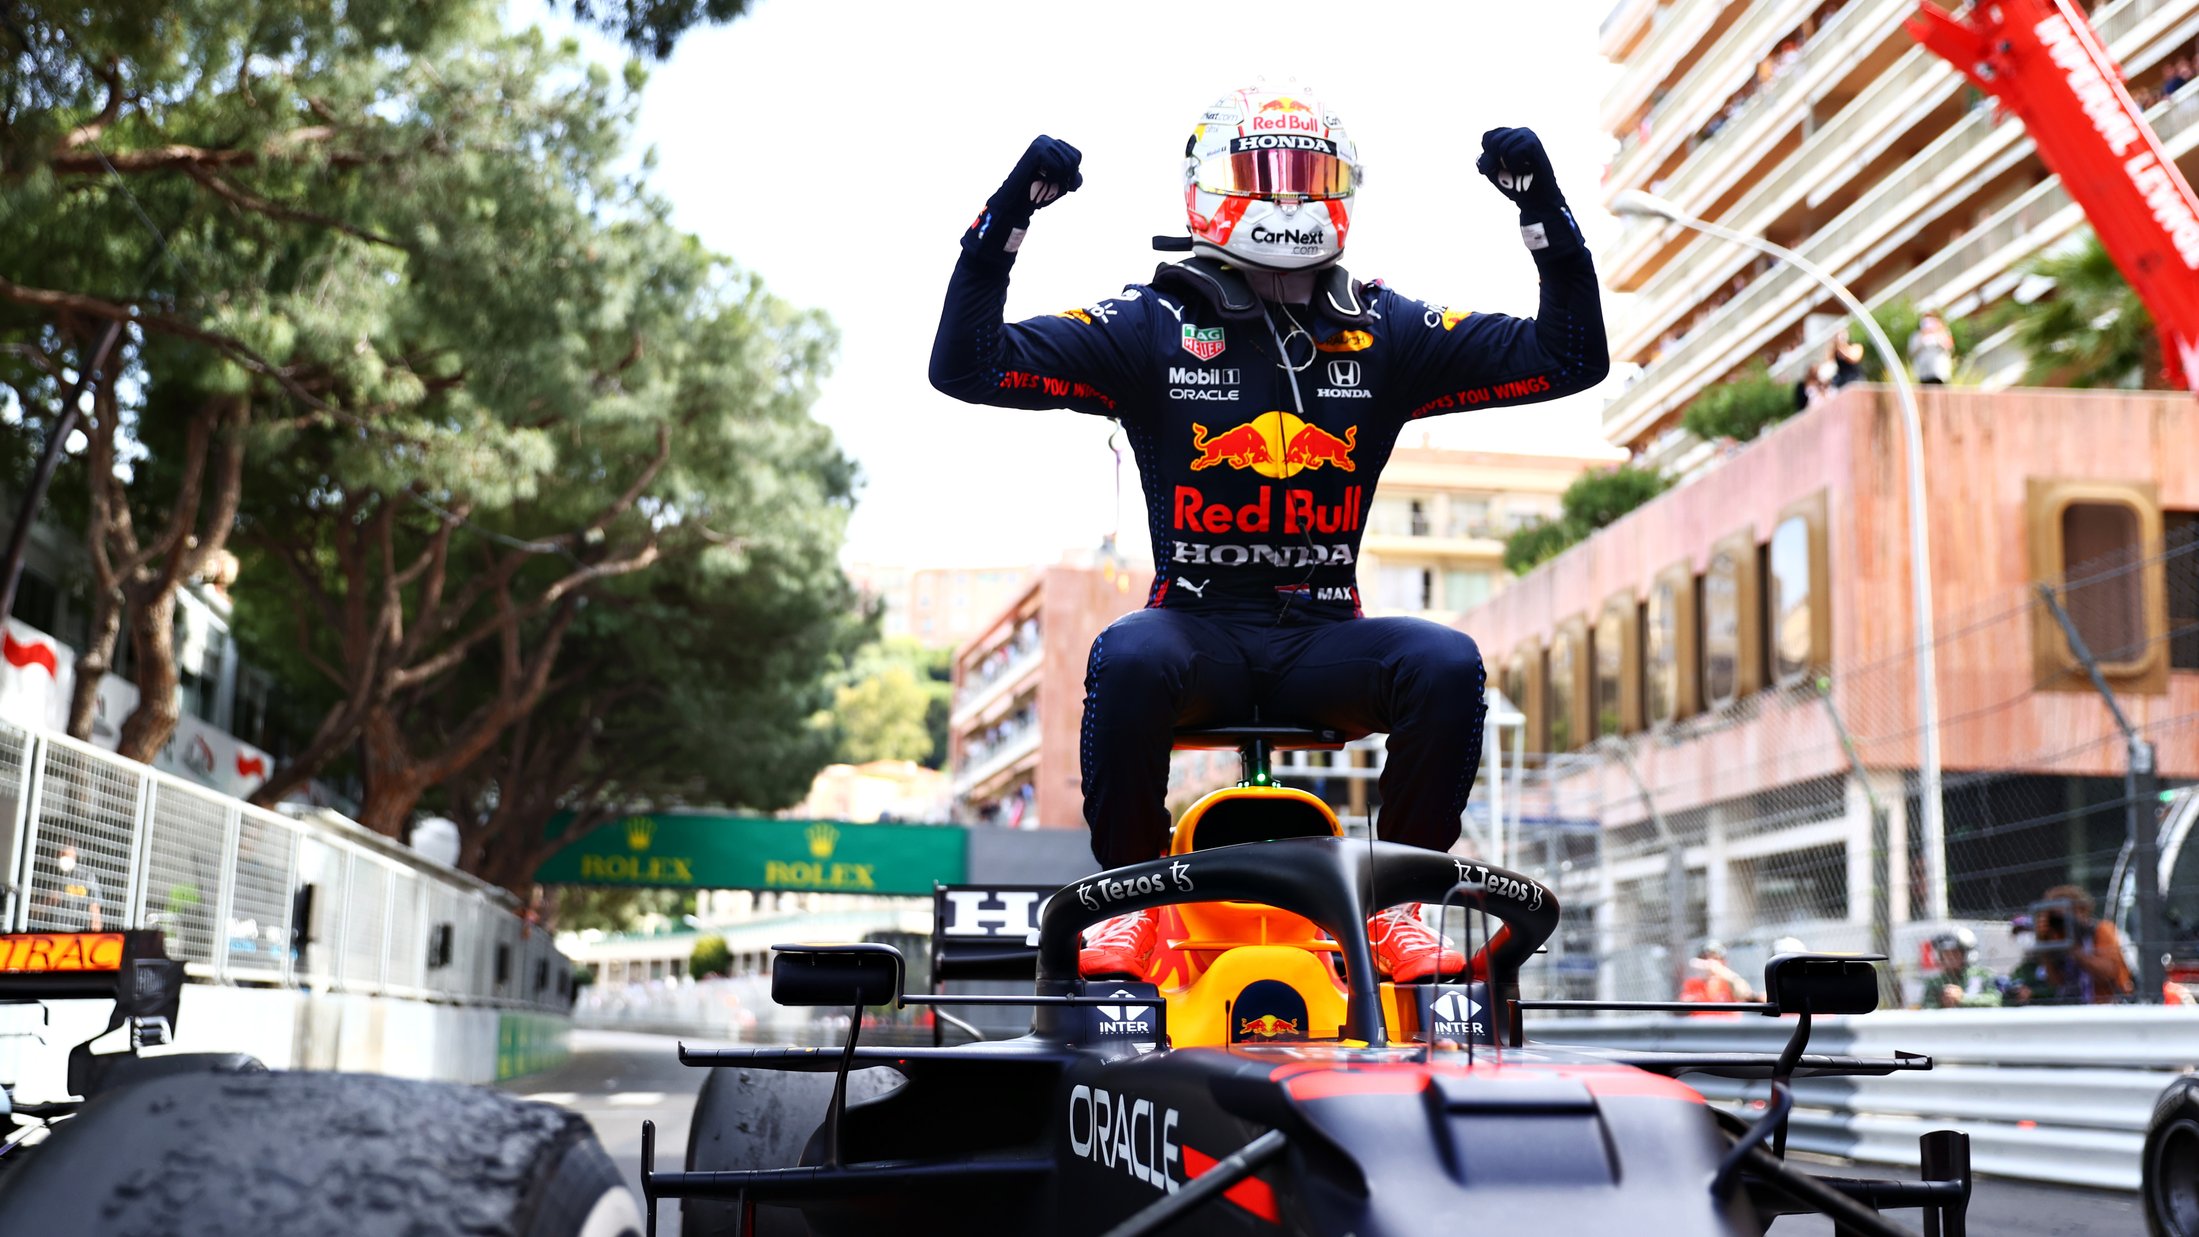 2021 Monaco Grand Prix race report & highlights: Verstappen claims Monaco victory over Sainz and Norris, after polesitter Leclerc fails to take start